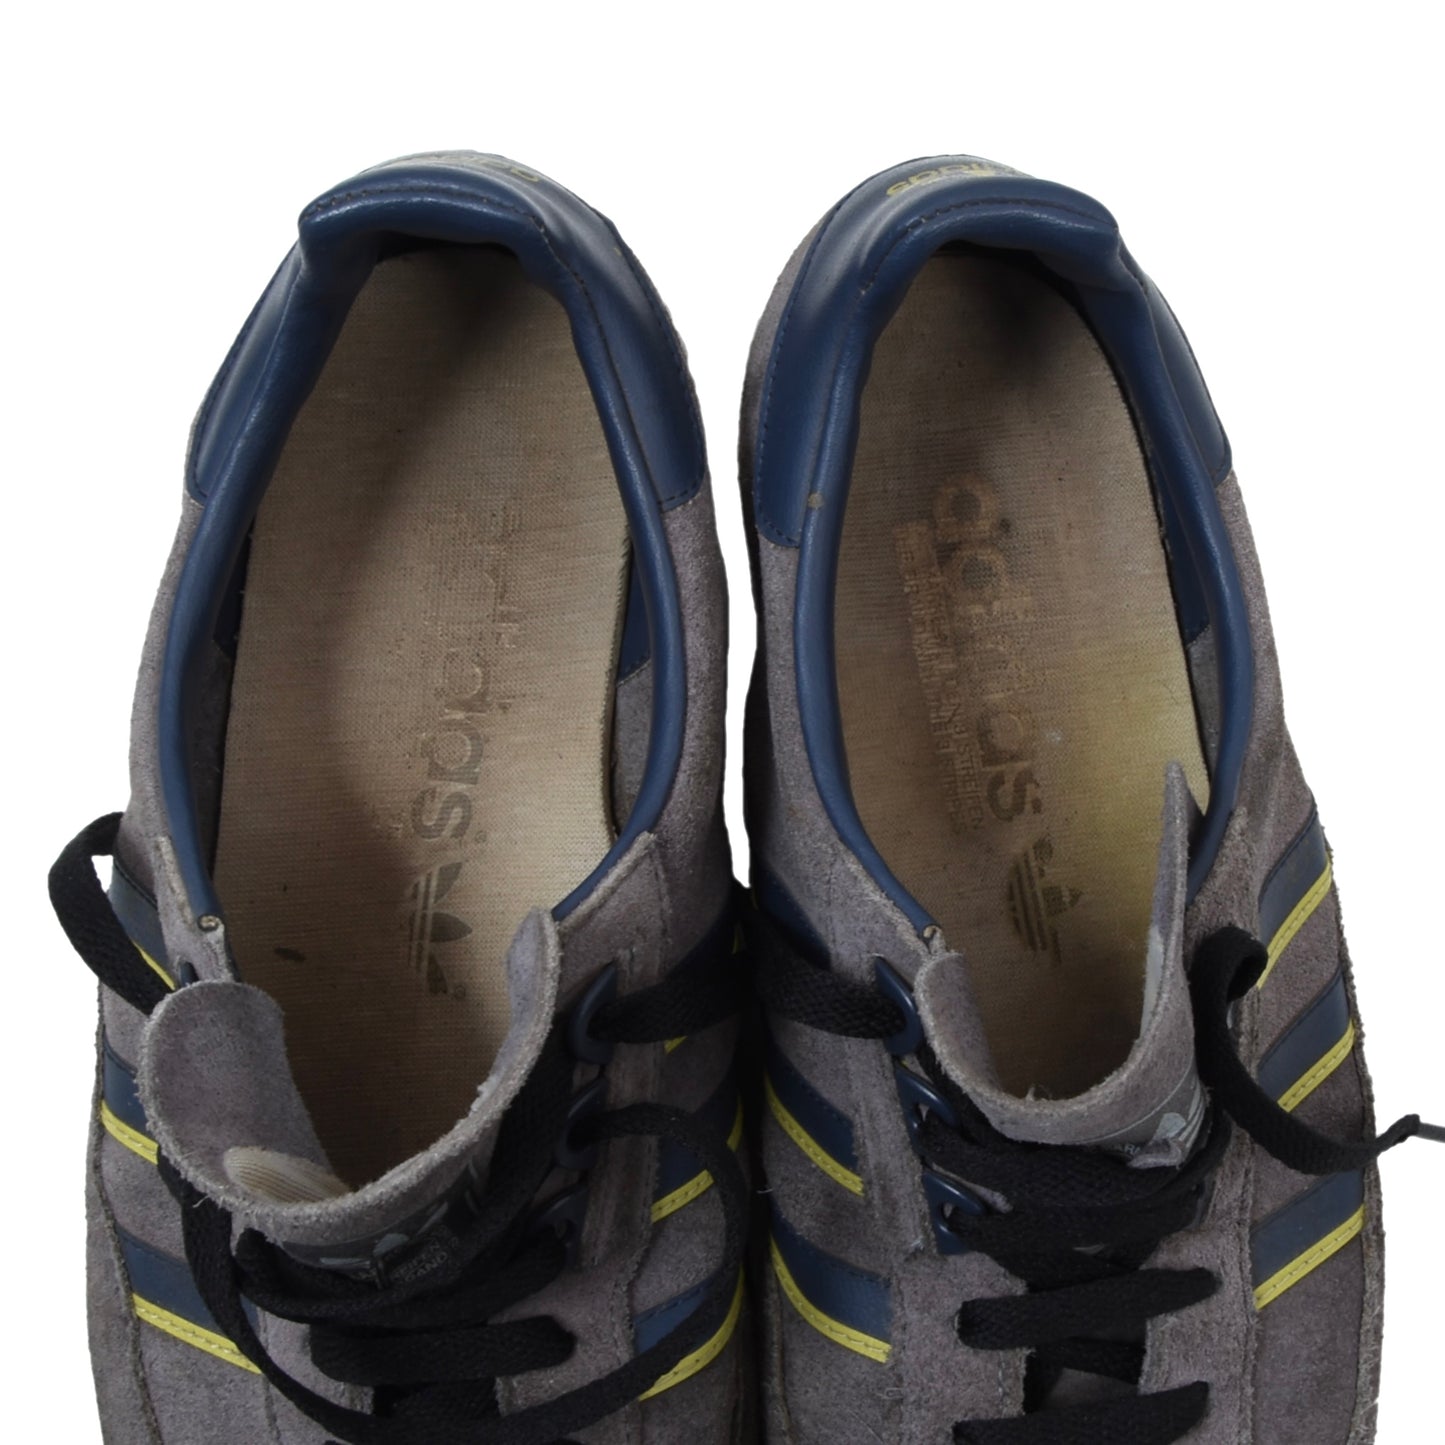 Vintage Adidas Jeans Sneakers Size 8 1/2/ 42 2/3